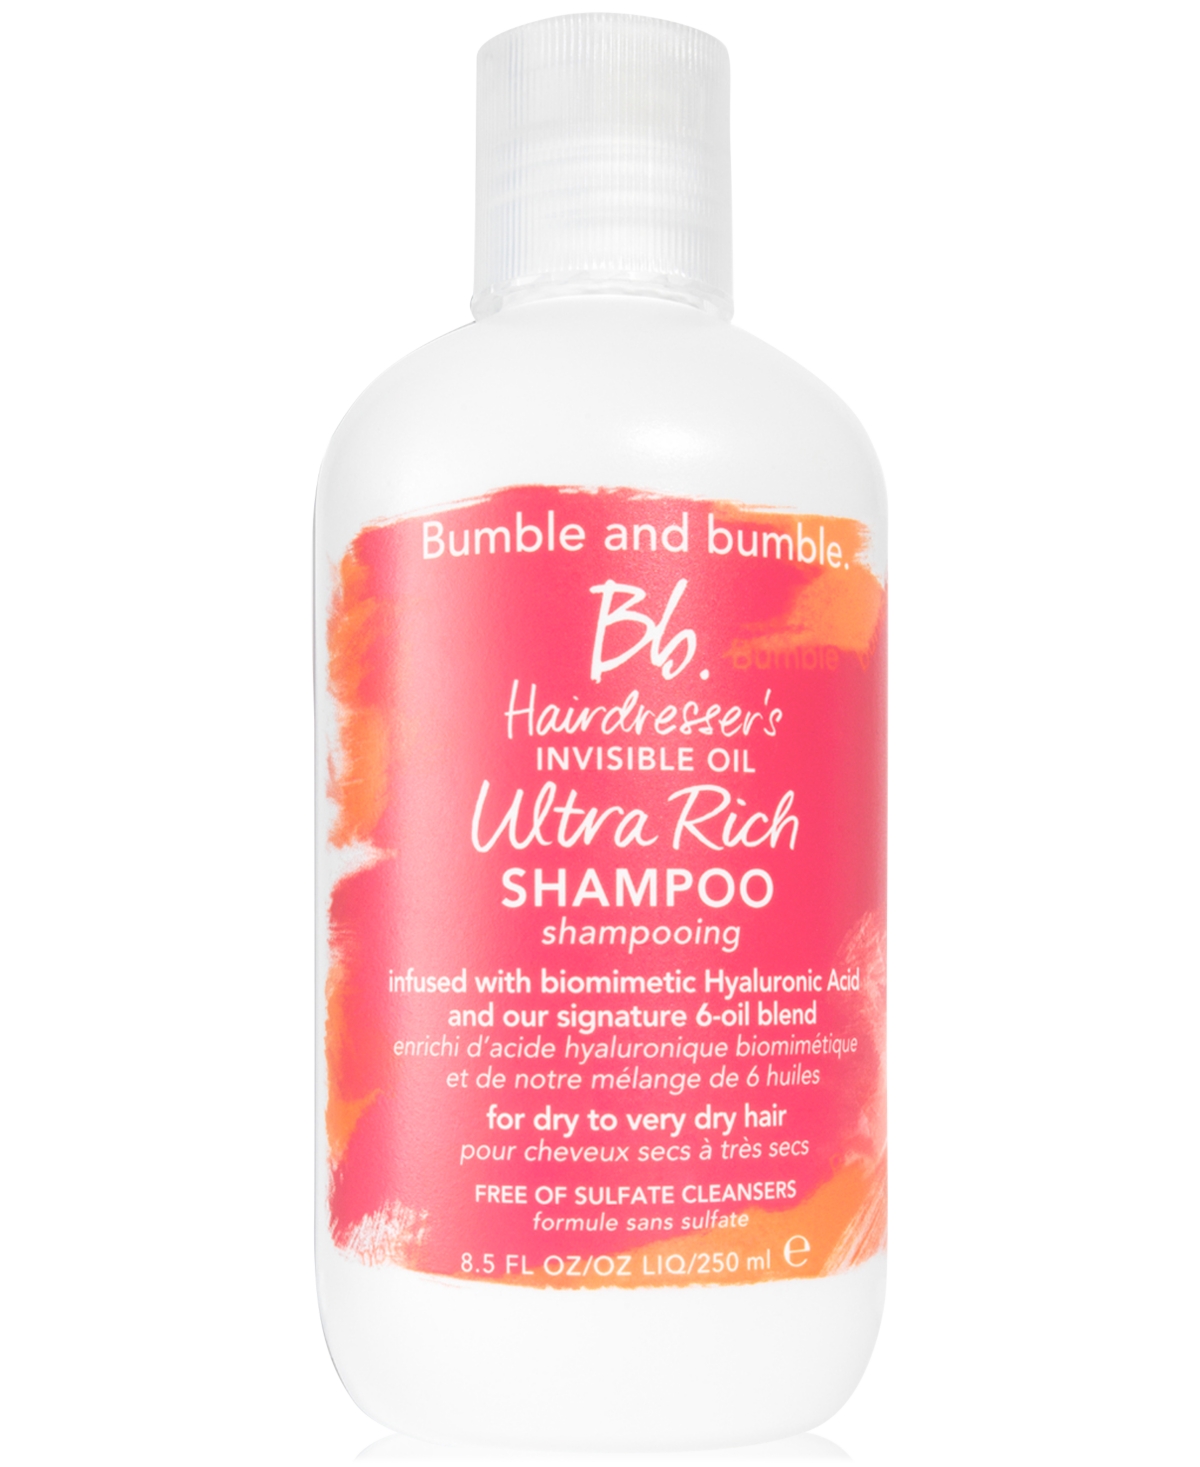 Bumble and Bumble Hairdresser's Invisible Oil Ultra Rich Shampoo, 8.5 oz.